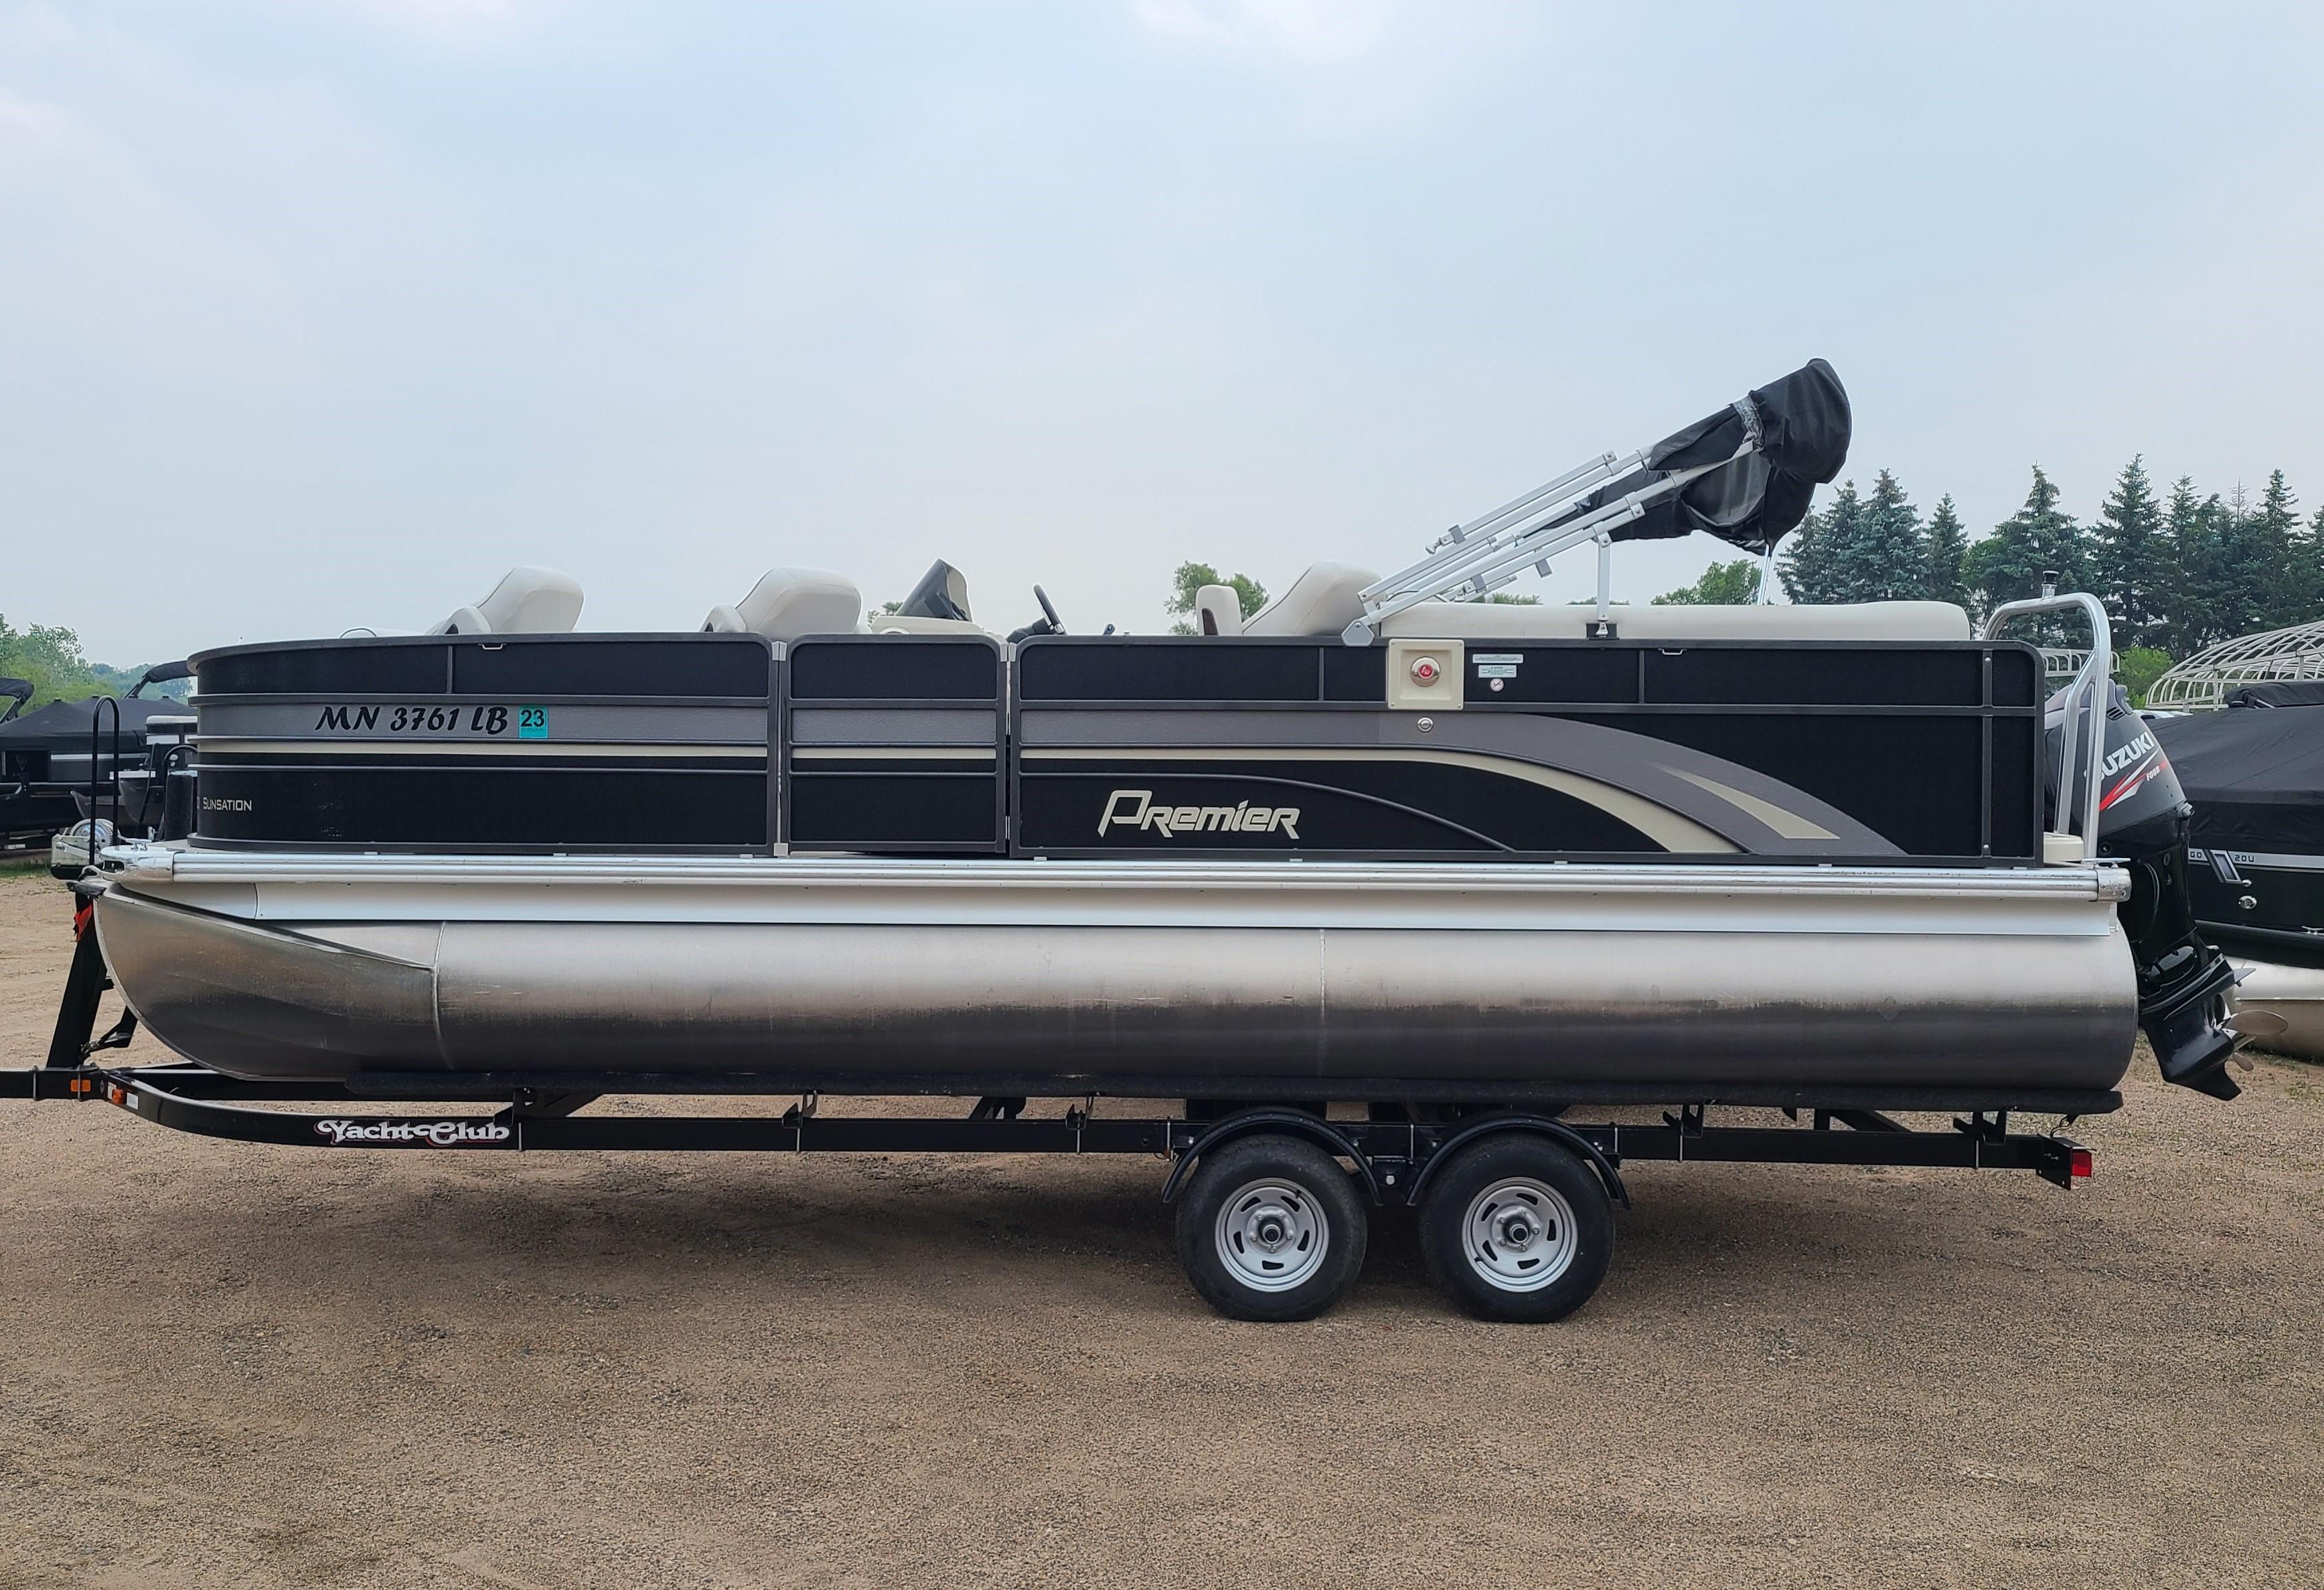 Premier 220 SunSation boats for sale in United States 